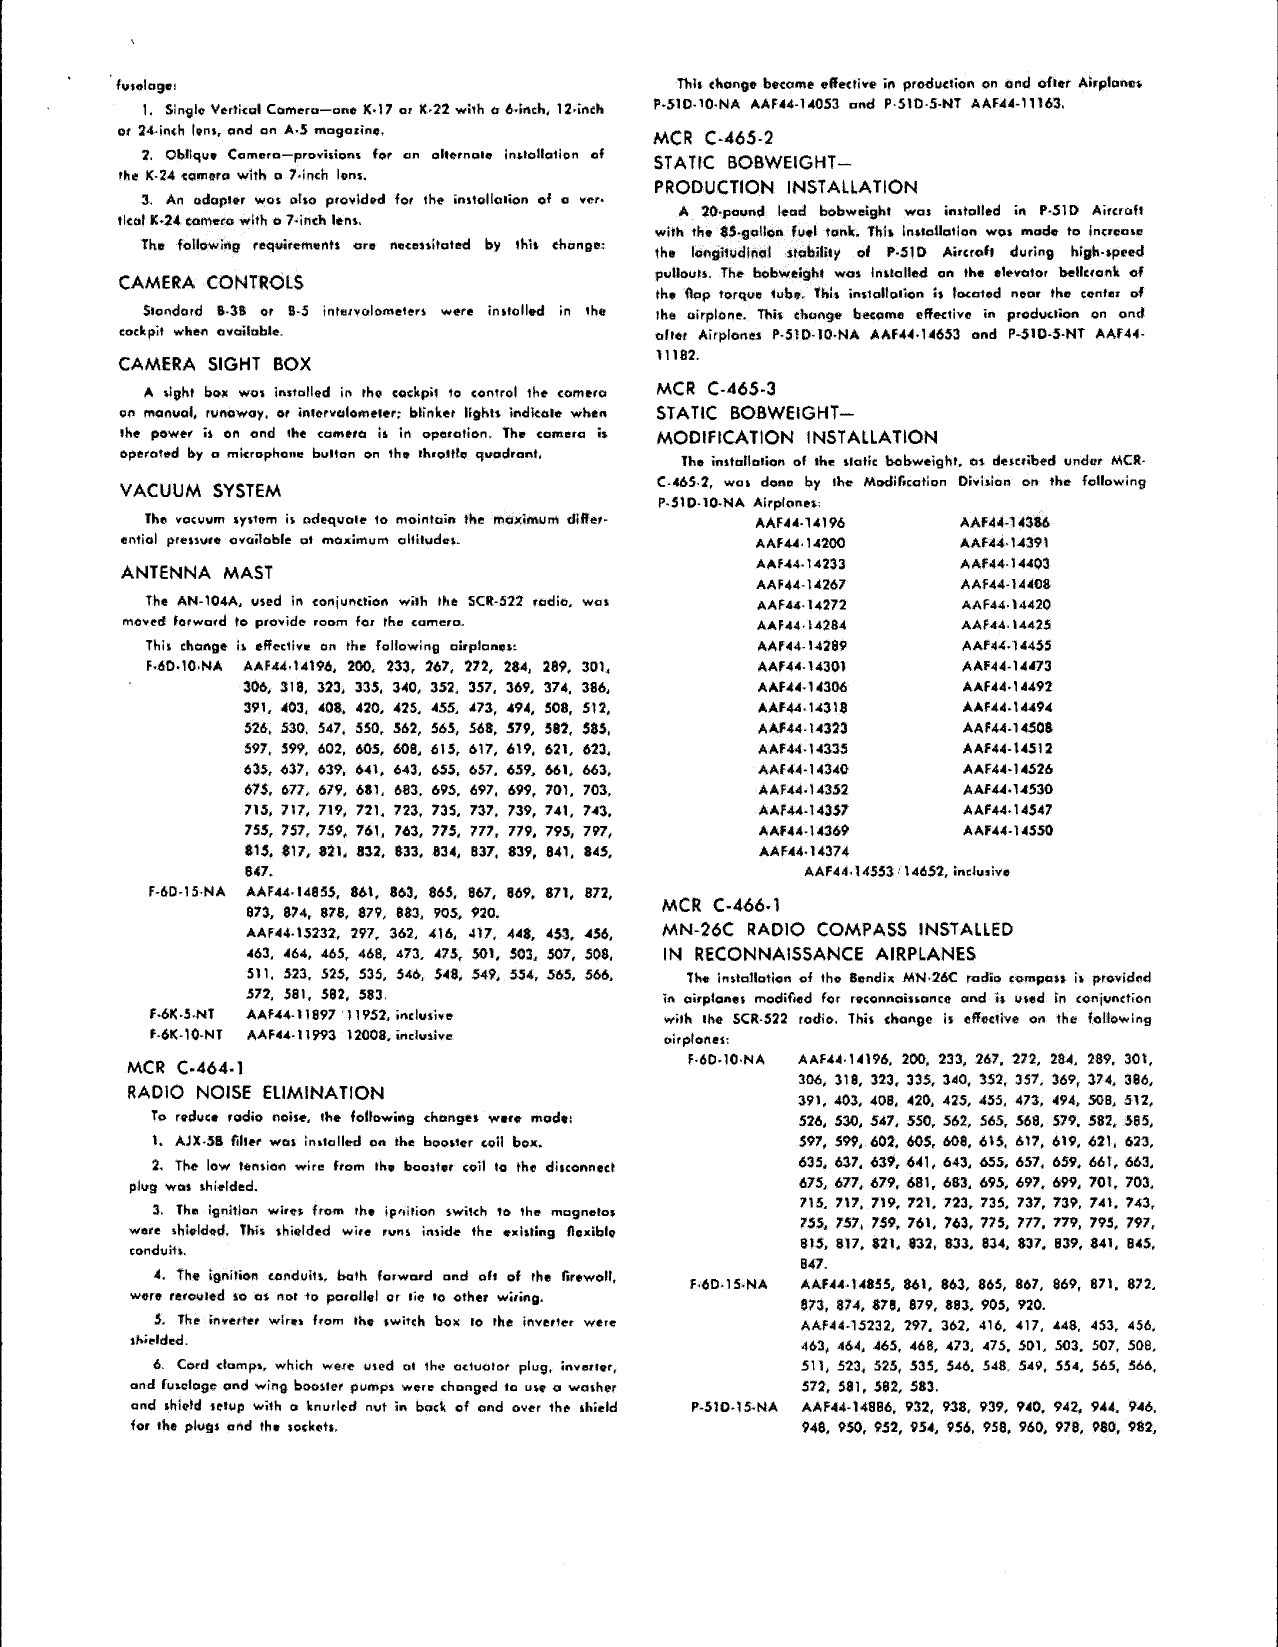 Sample page 4 from AirCorps Library document: Summary of Changes - Block Description for P-51D-10 Airplanes